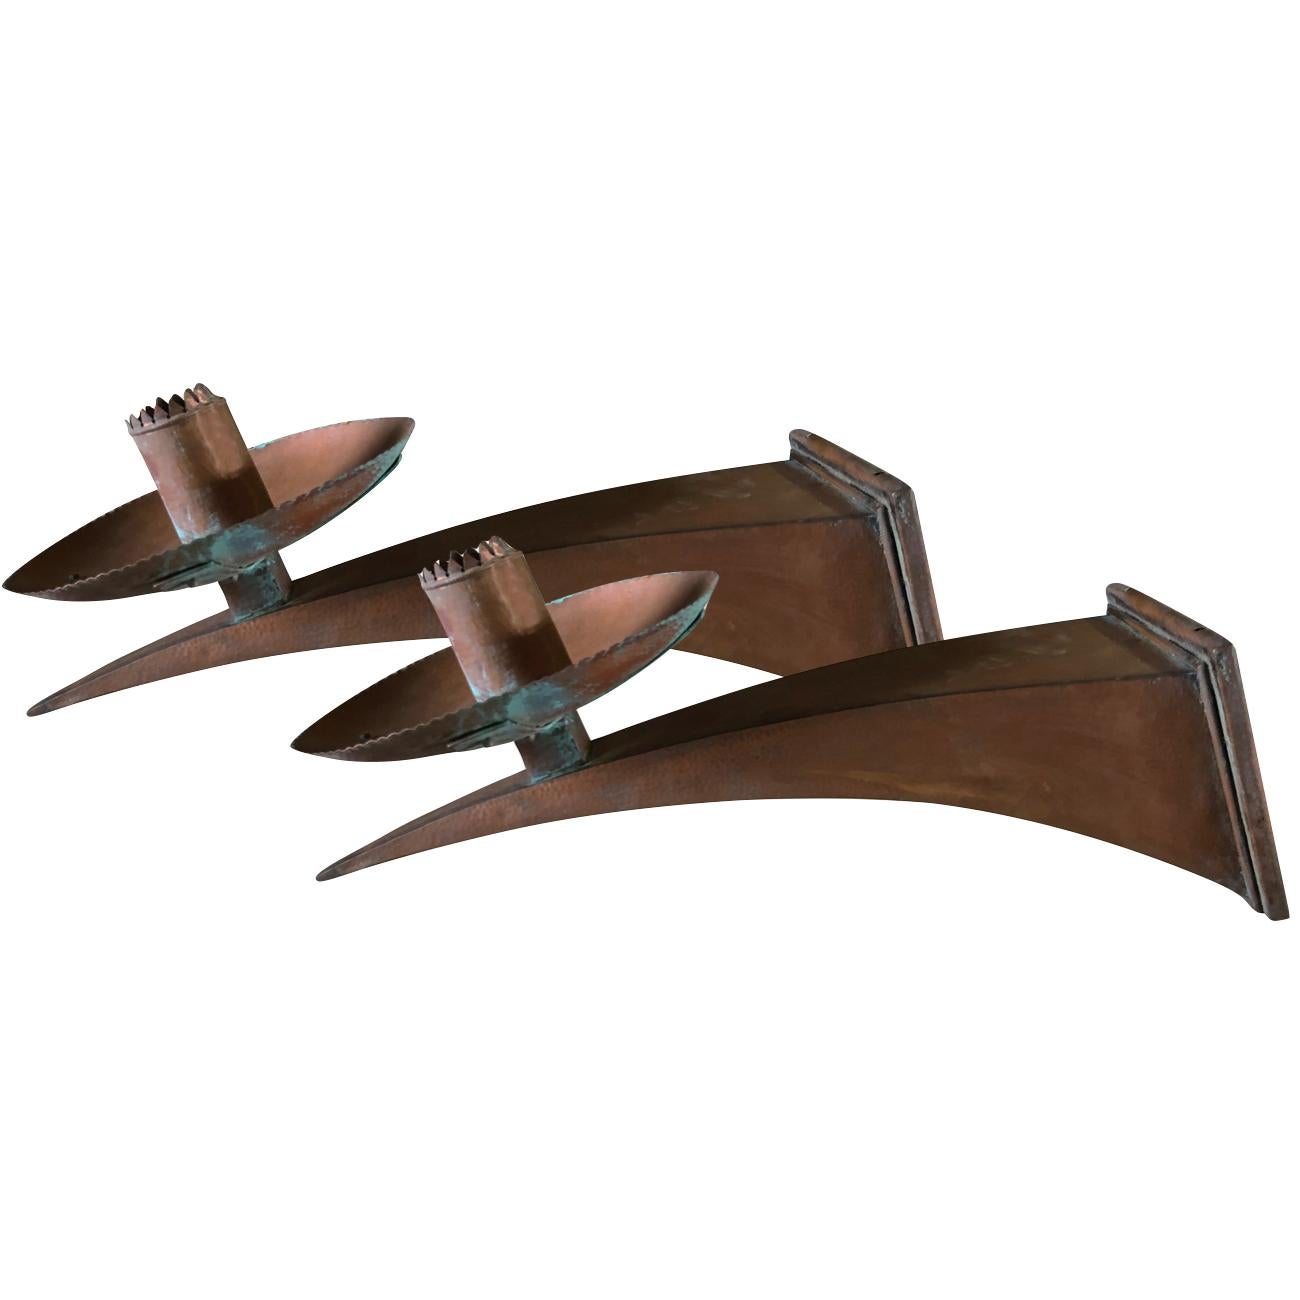 A vintage Art Deco French set of four very impressive wall sconces made of handcrafted copper. The detailed lights are in good condition. Wear consistent with age and use, circa 1930, Pams, France.